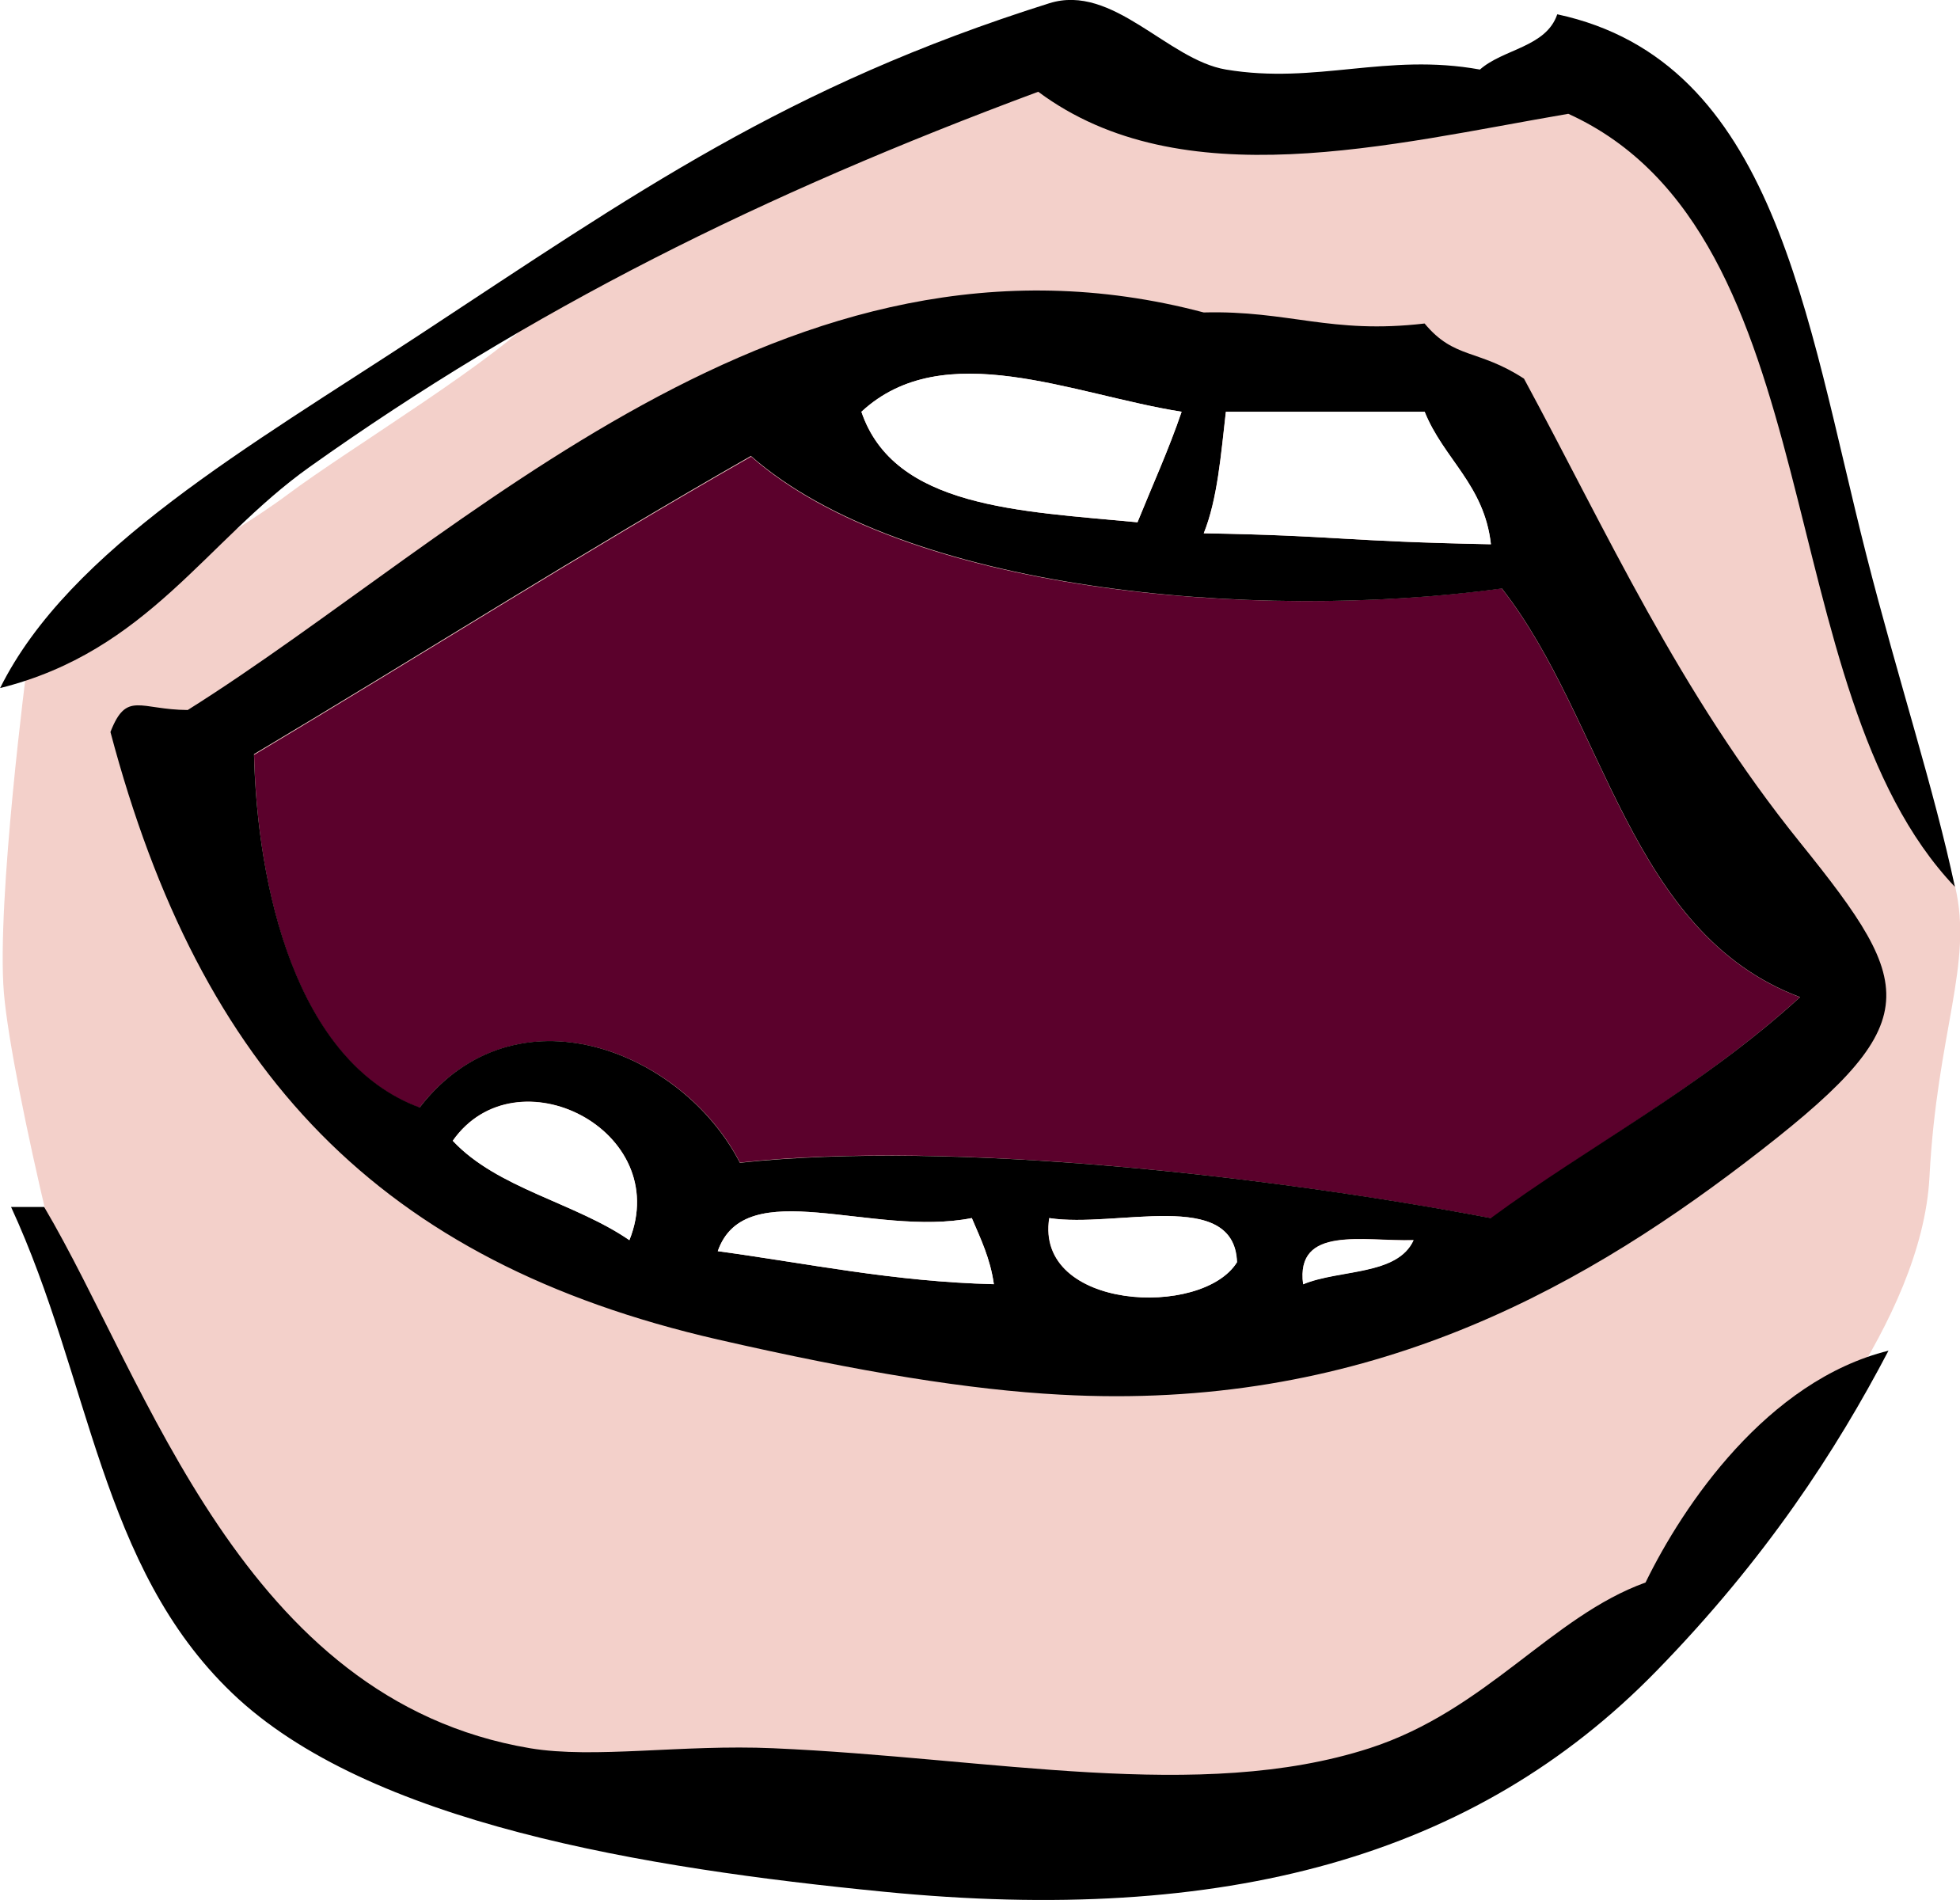 Mouth Hd Image Clipart